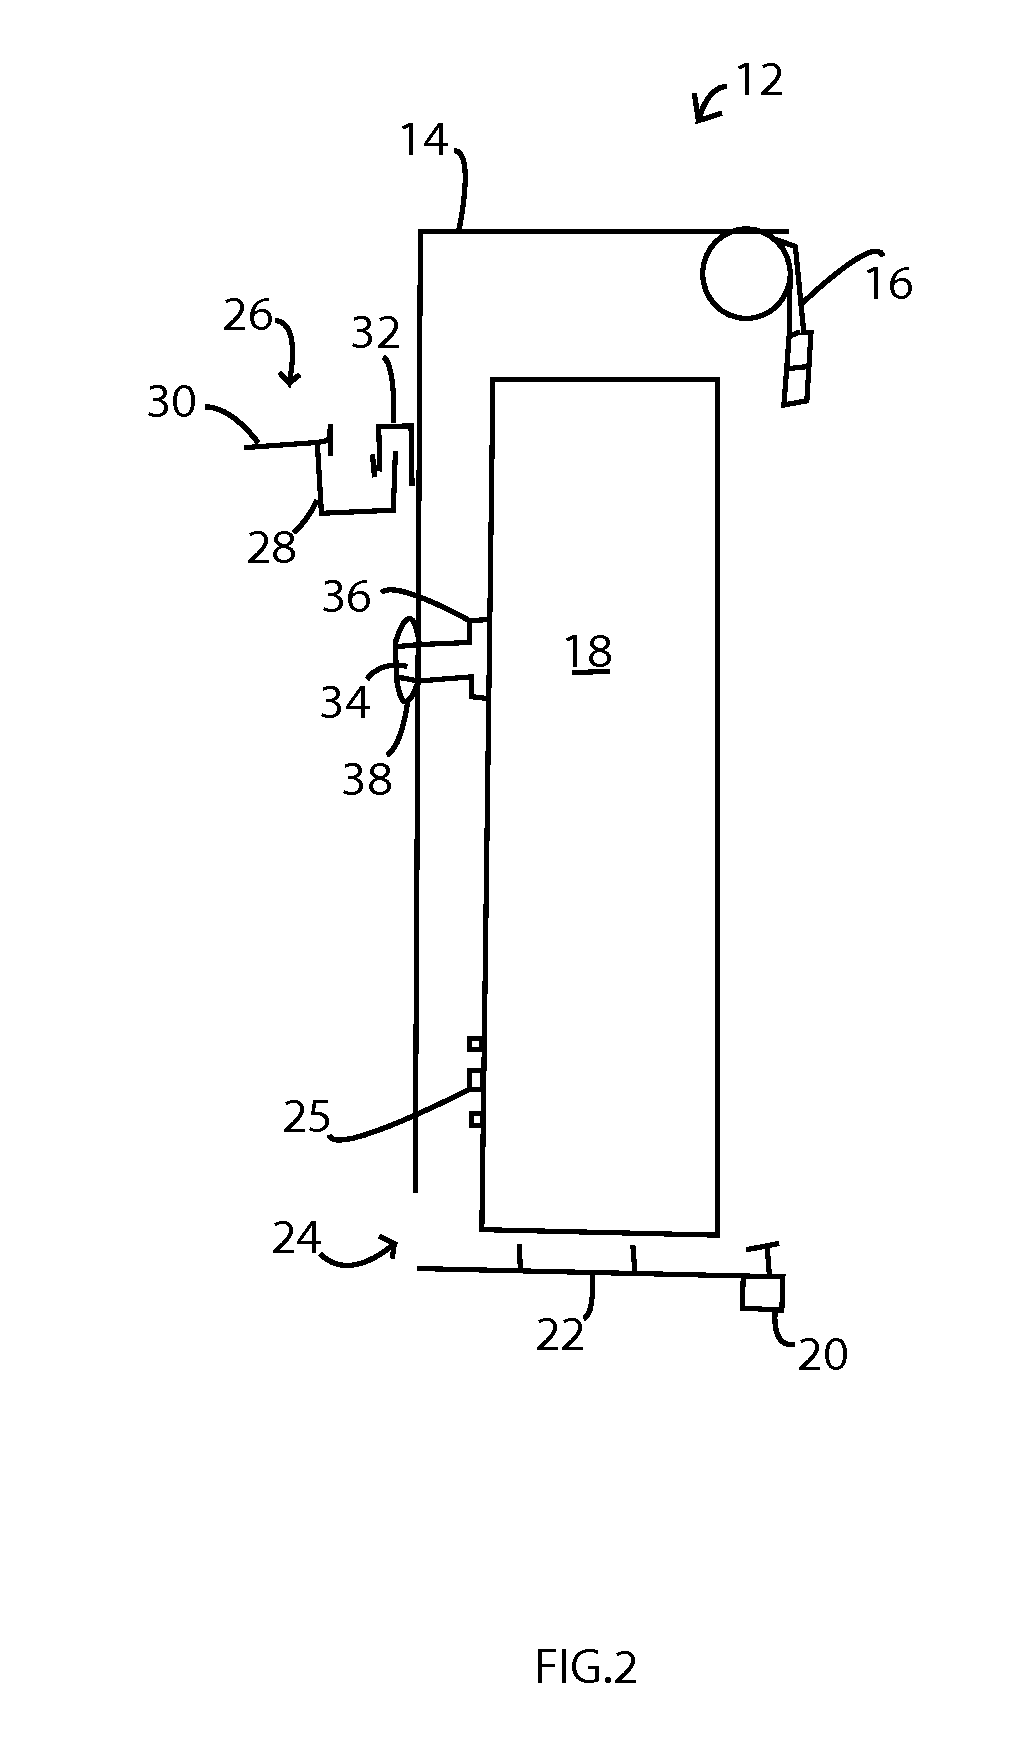 Method and Device for Protecting an Outdoor Electronic Screen